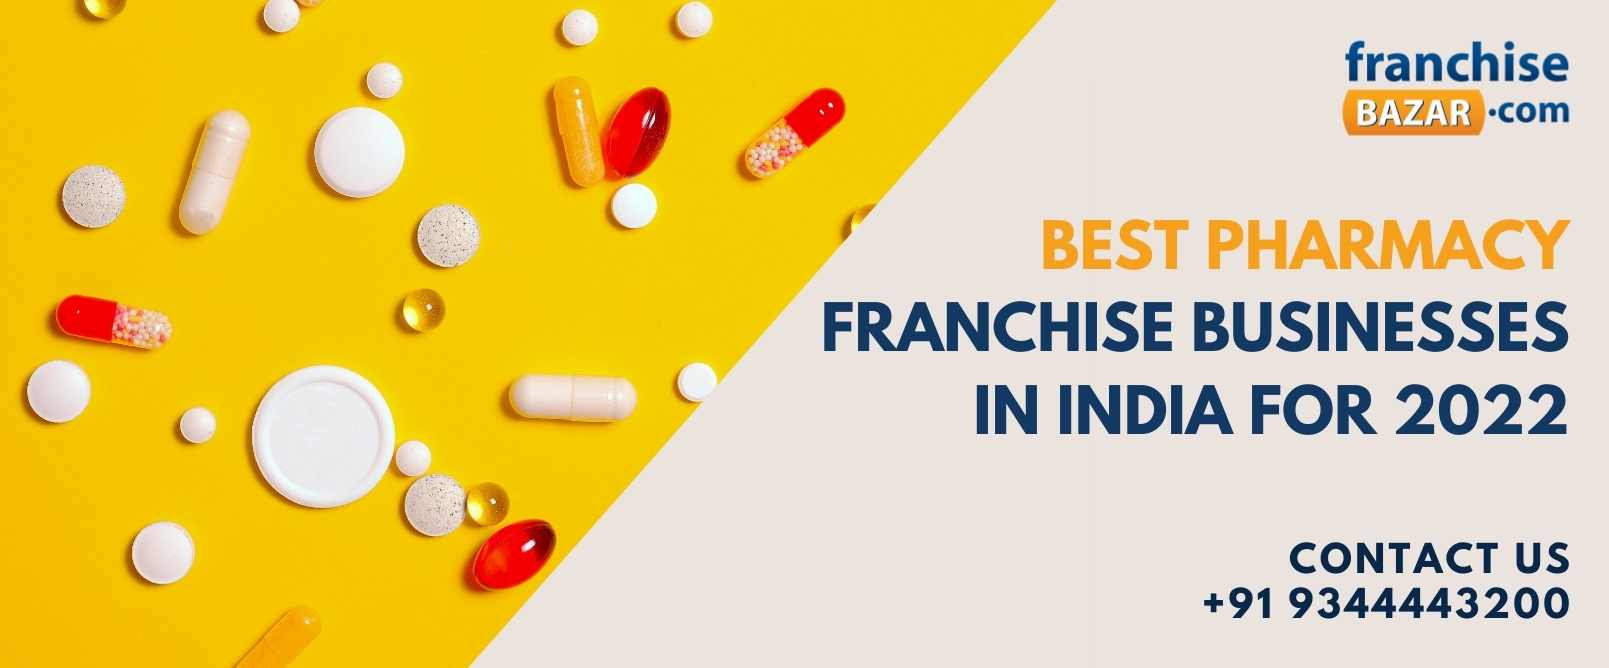 Best Pharmacy Franchise Businesses In India For 2022	